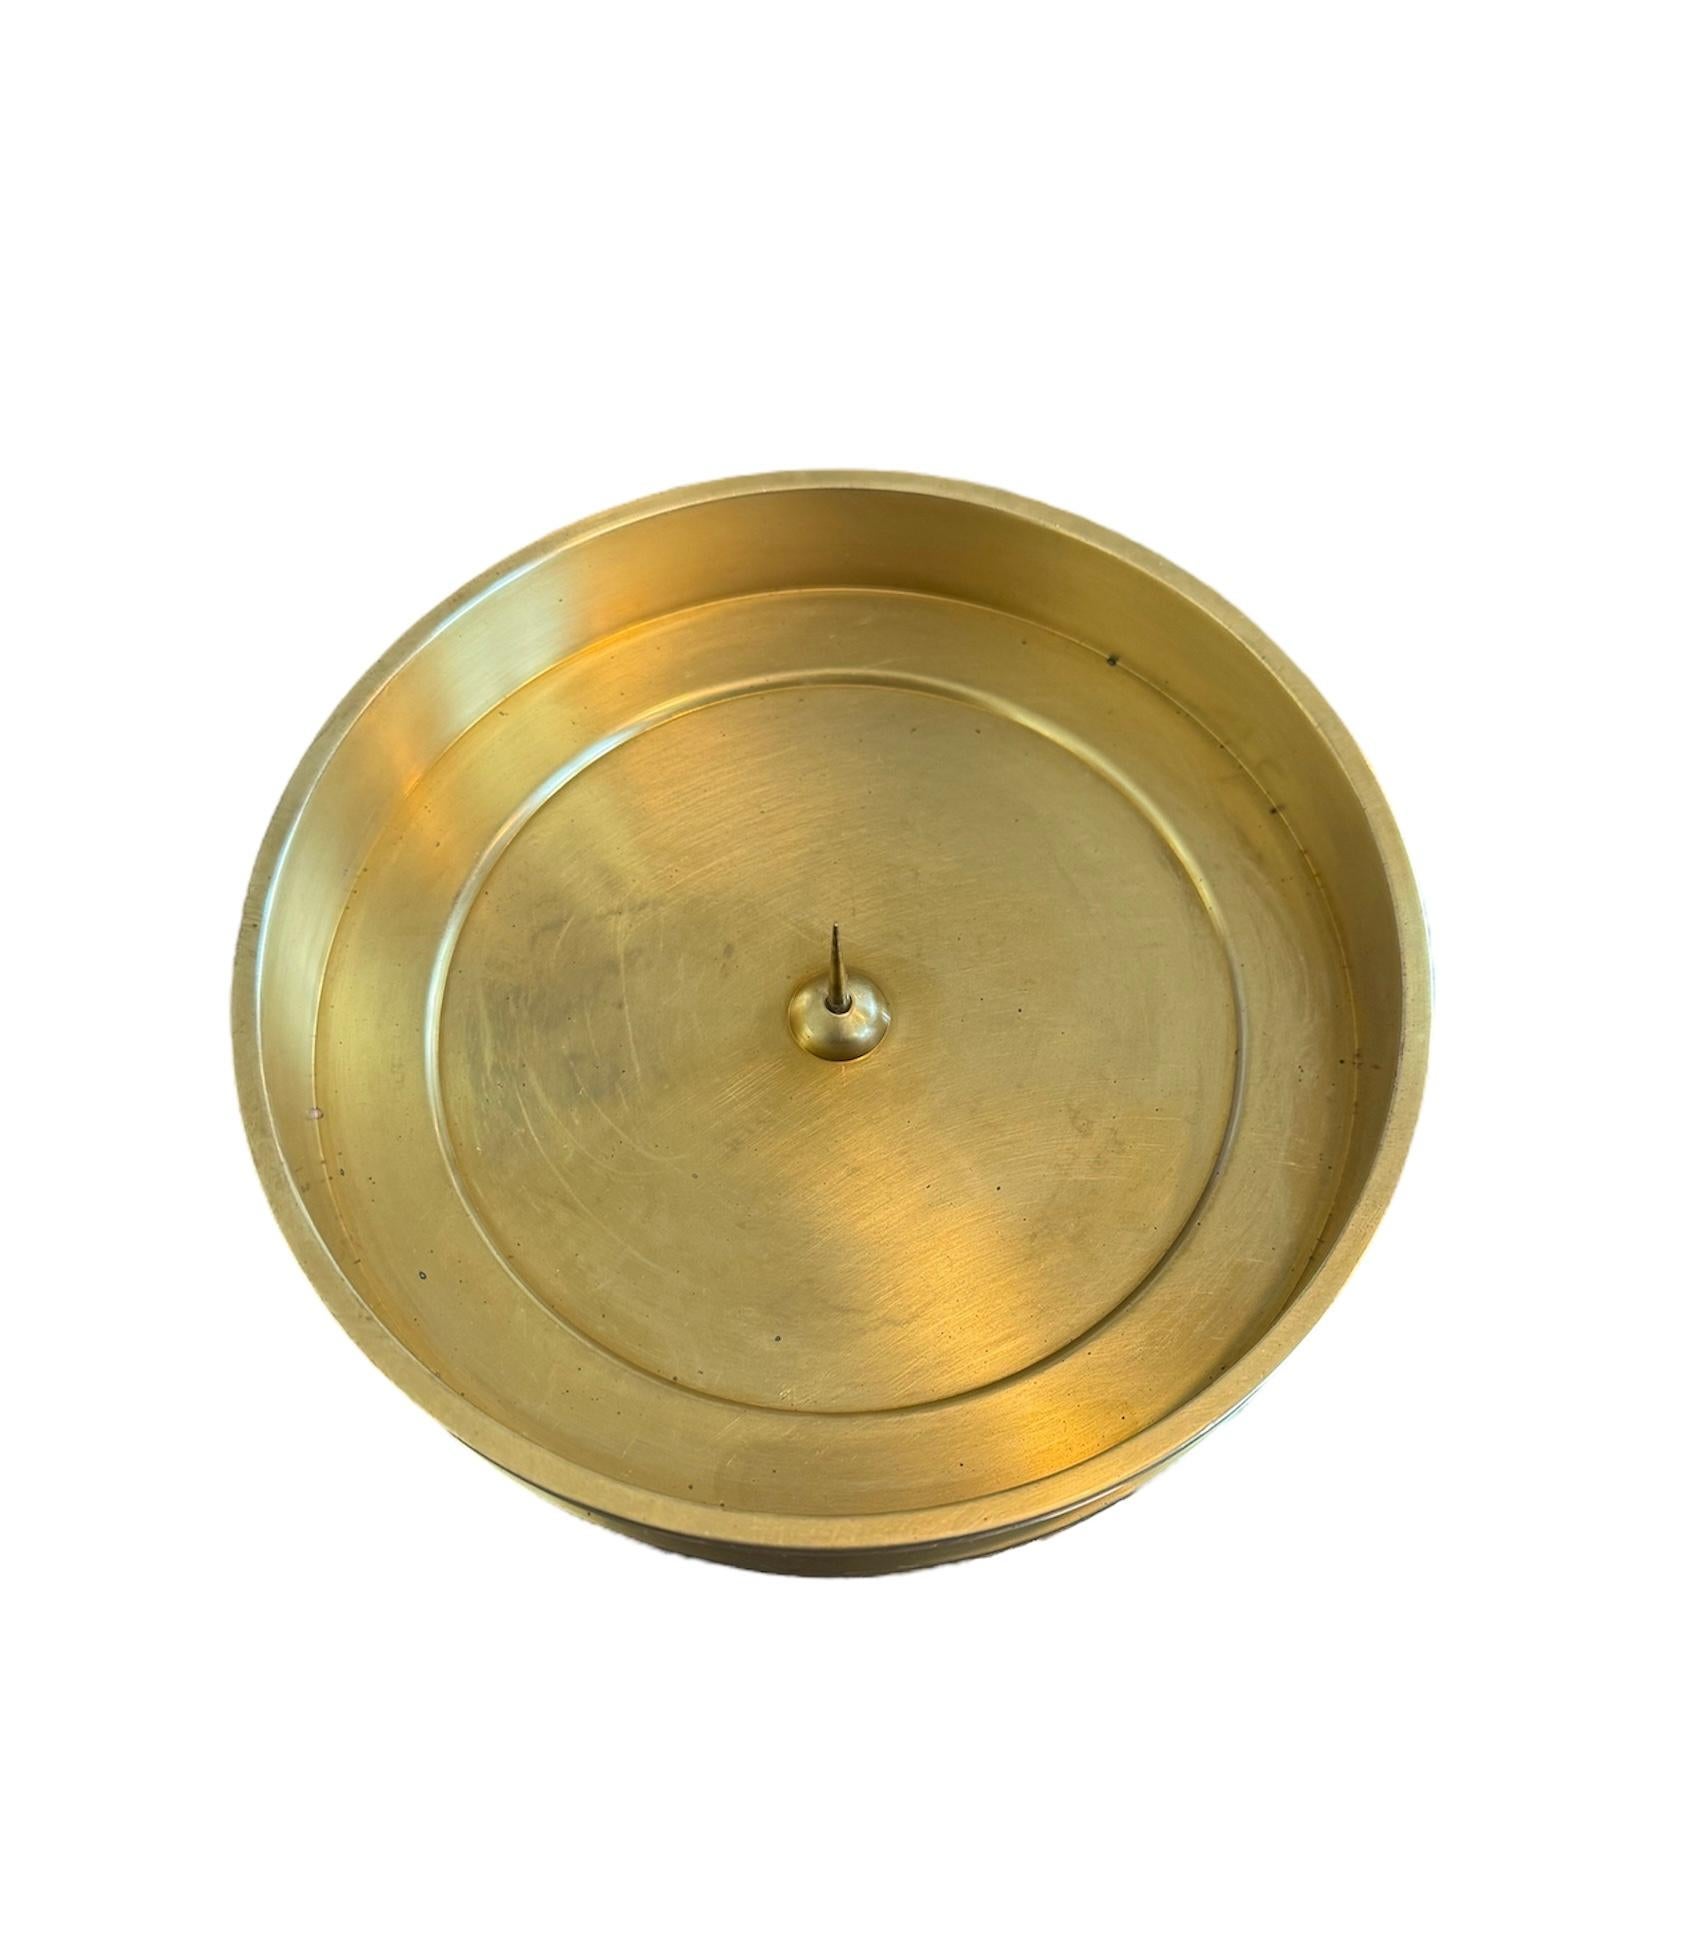 Elevate your home decor with this elegant brass candle holder dish, a beautiful accessory that brings a touch of sophistication to any setting. Designed to hold a single pillar candle, it casts a warm, inviting glow, perfect for creating an intimate